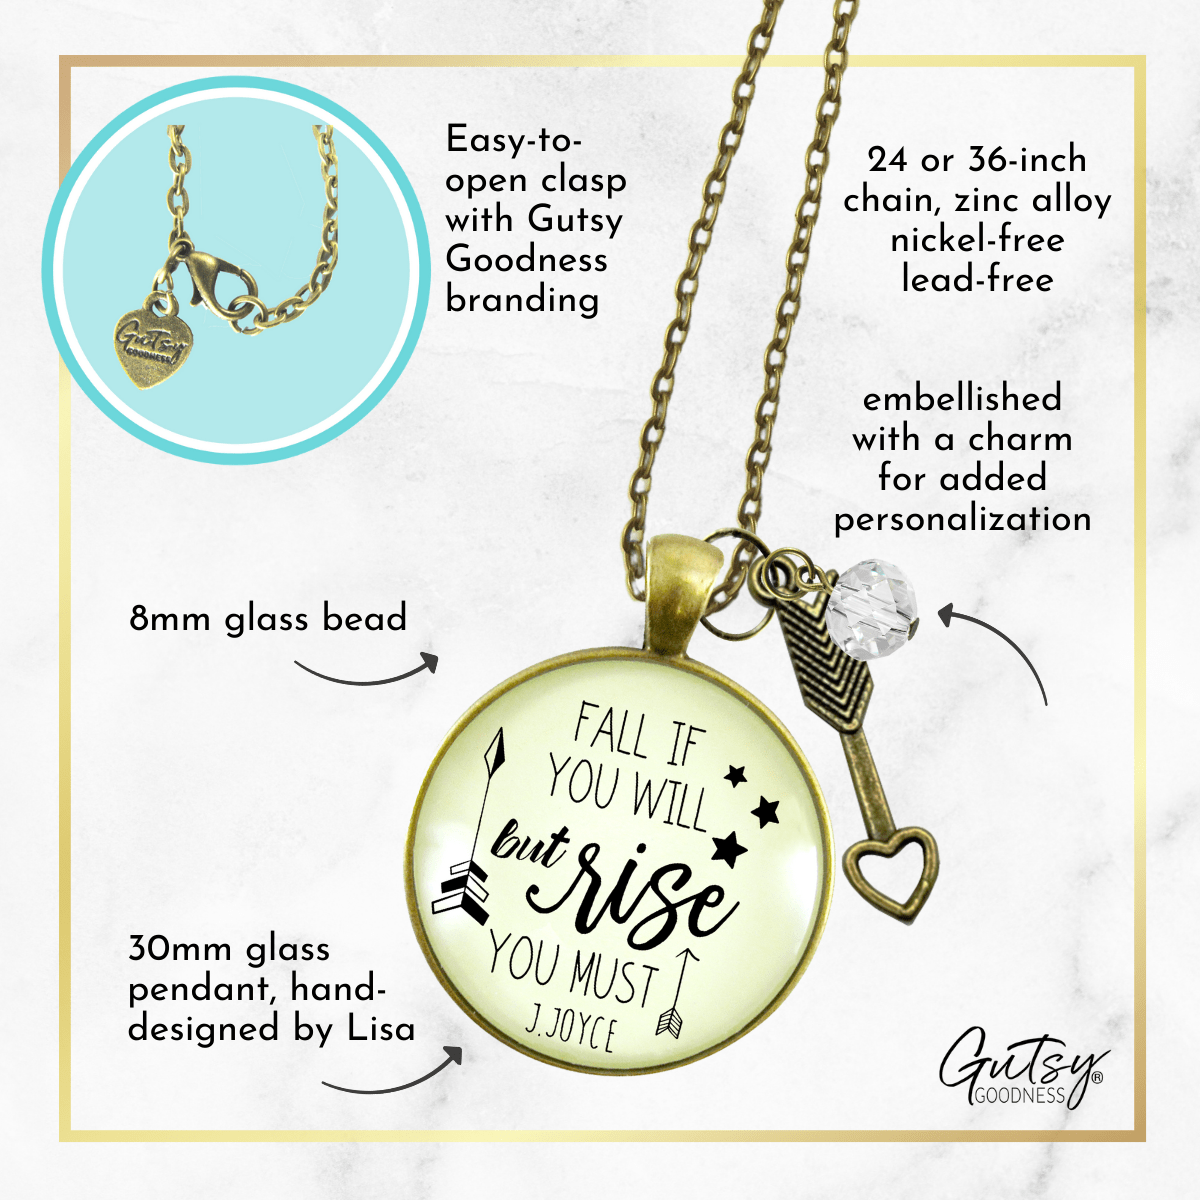 Gutsy Goodness Motivational Necklace Fall If You Will But Rise Positive Word Jewelry - Gutsy Goodness Handmade Jewelry;Motivational Necklace Fall If You Will But Rise Positive Word Jewelry - Gutsy Goodness Handmade Jewelry Gifts